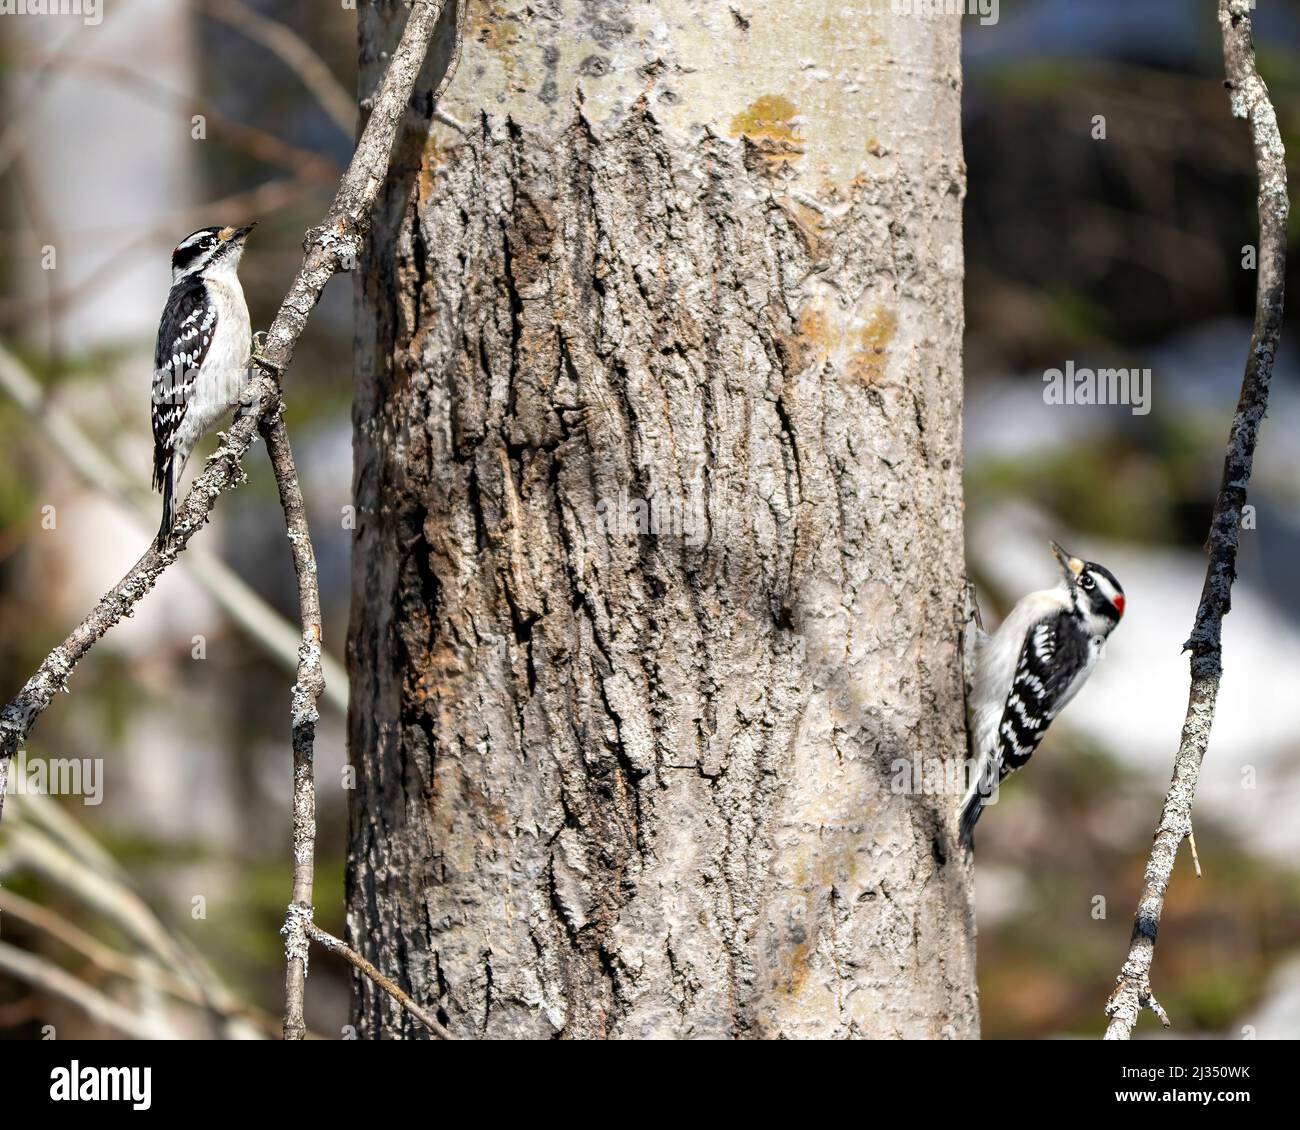 Downy Woodpecker couple on a tree trunk with a blur background in their environment and habitat surrounding displaying white and black feather plumage Stock Photo